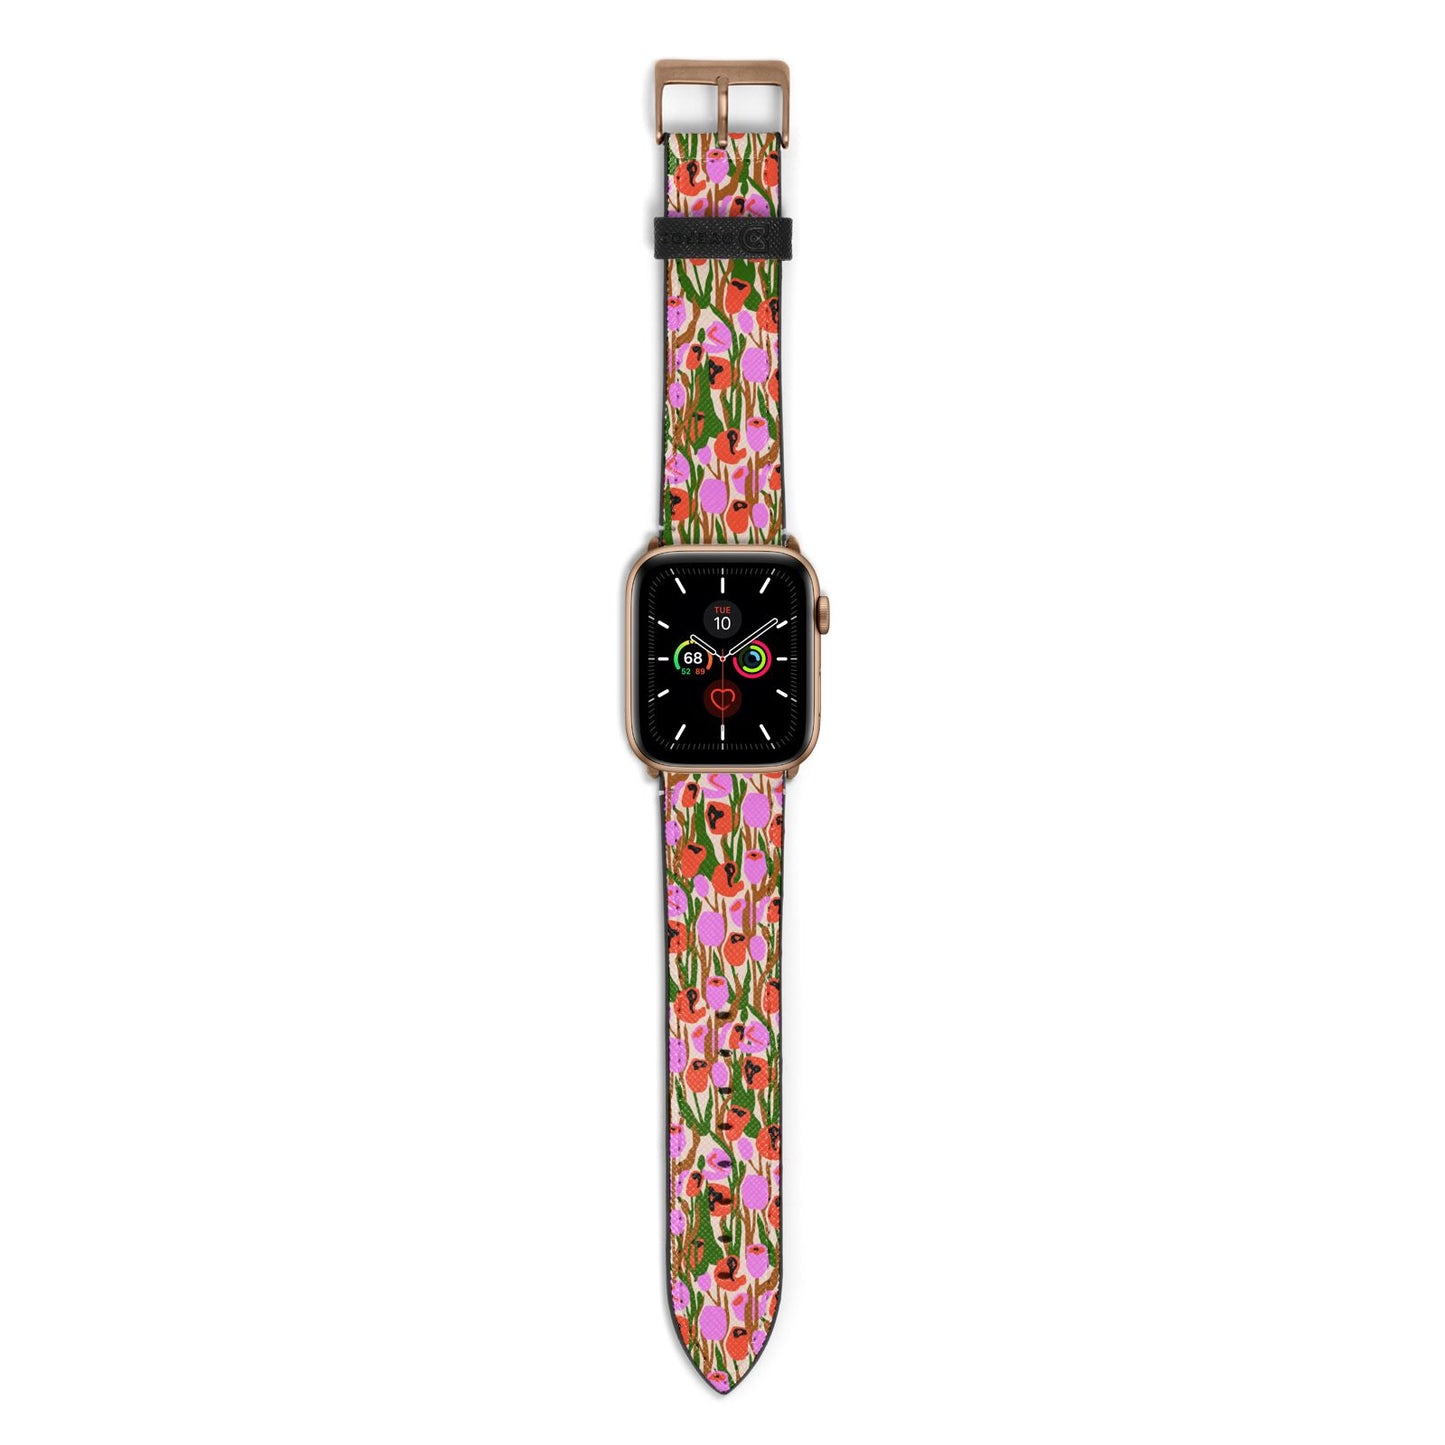 Floral Apple Watch Strap with Gold Hardware